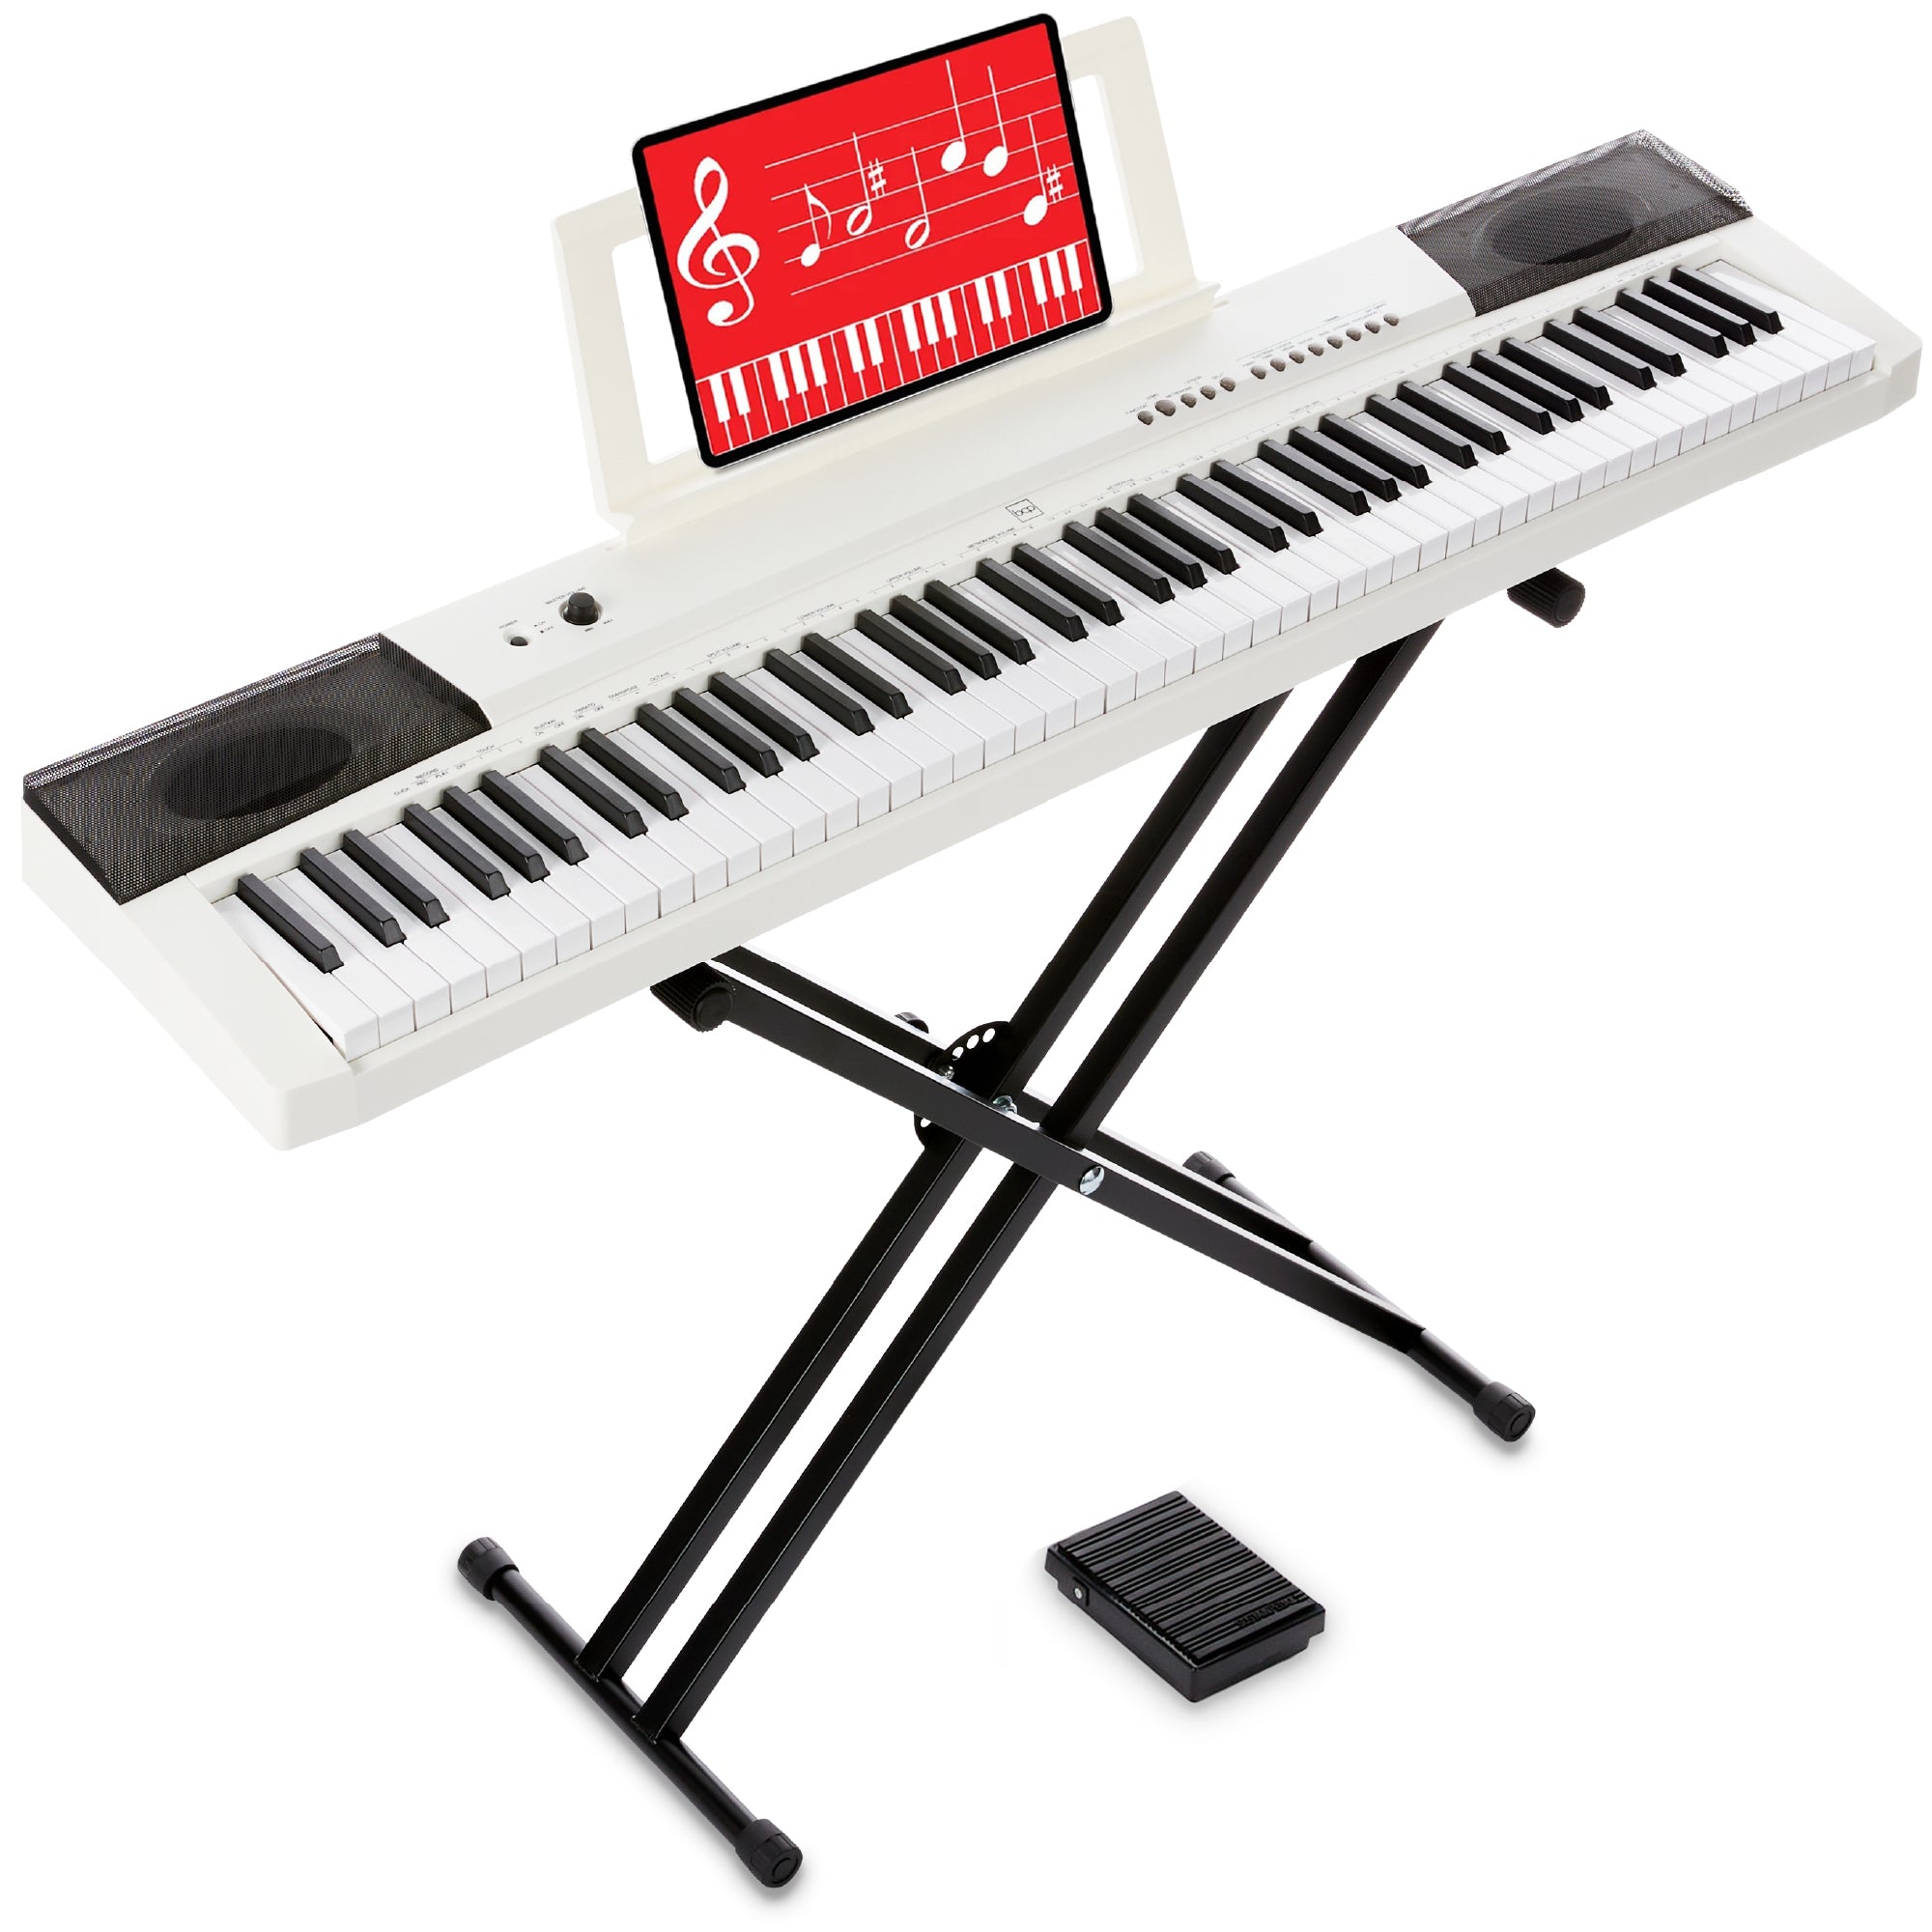 The 10 best 88-key weighted keyboards and digital pianos